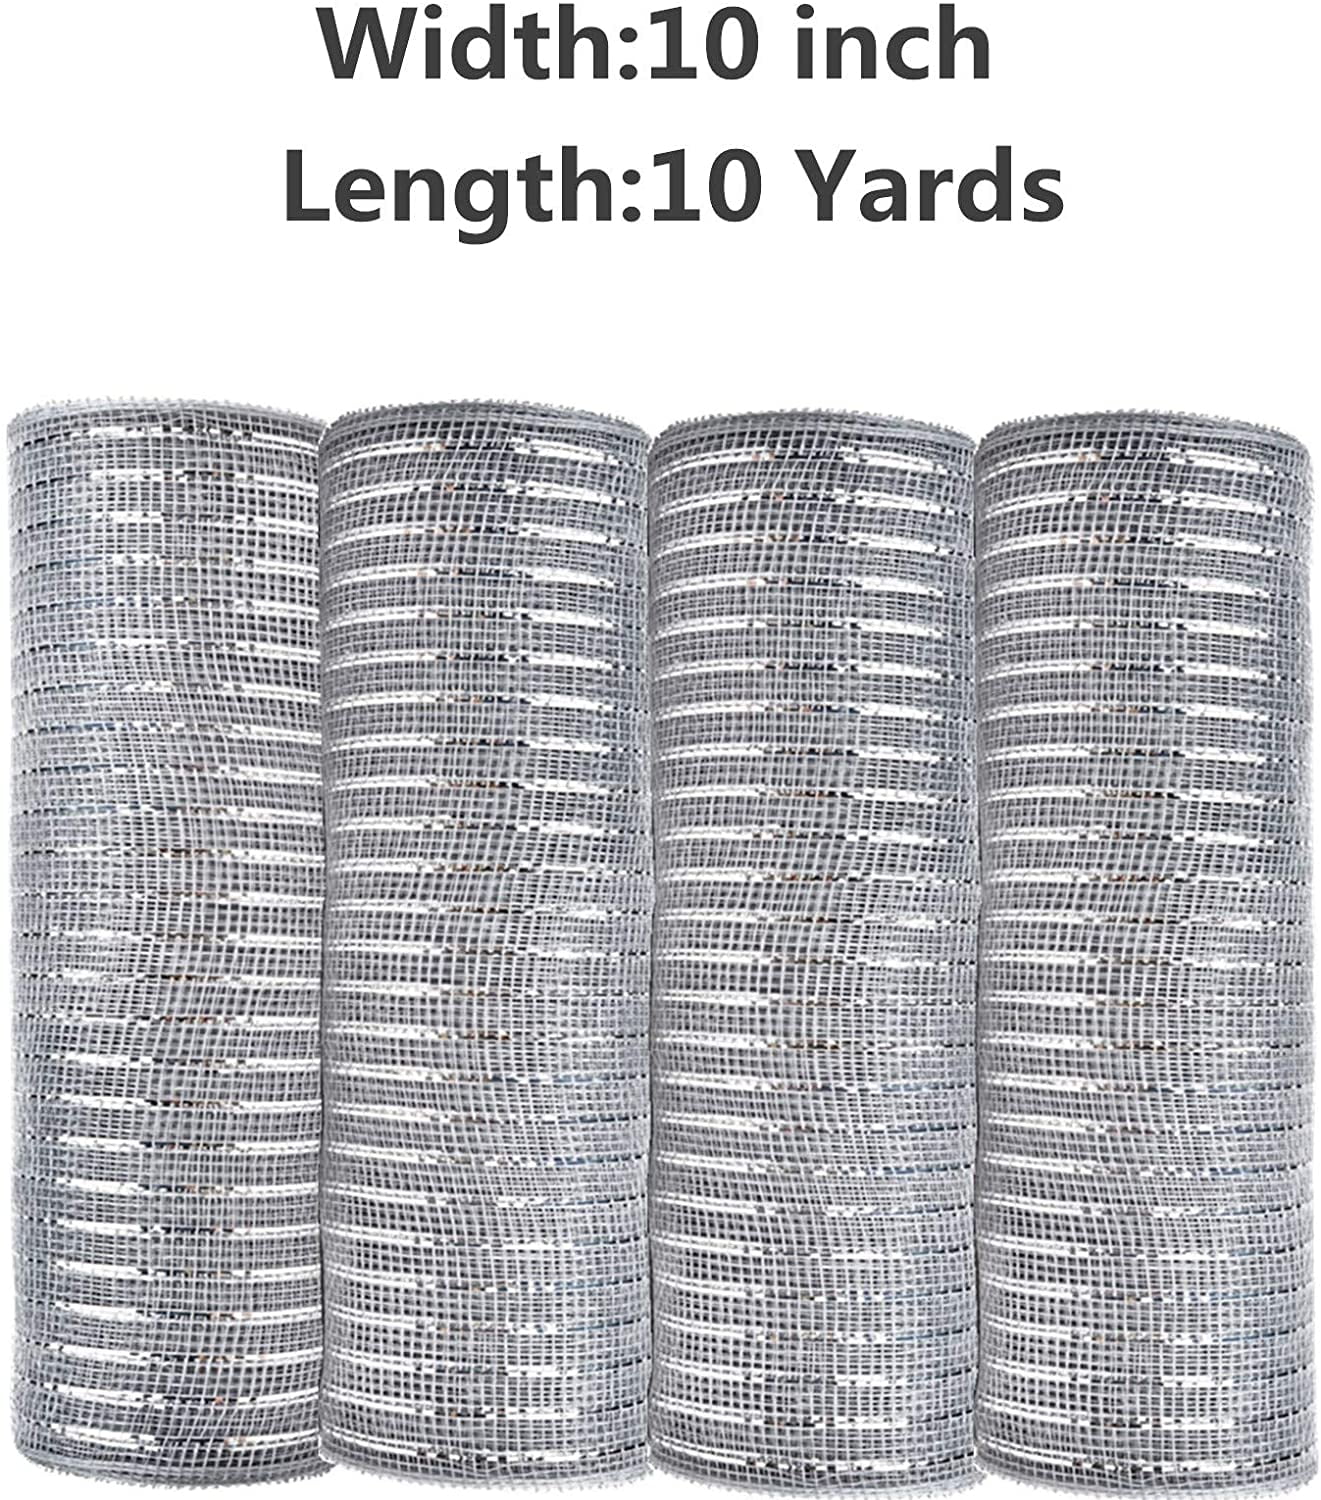 4 Rolls 10 Inch x 10 Yards Deco Poly Mesh Ribbon Silver Metallic Foil Deco Poly Mesh Set for Crafts,Making Wreaths,Swag,Bows and Garland